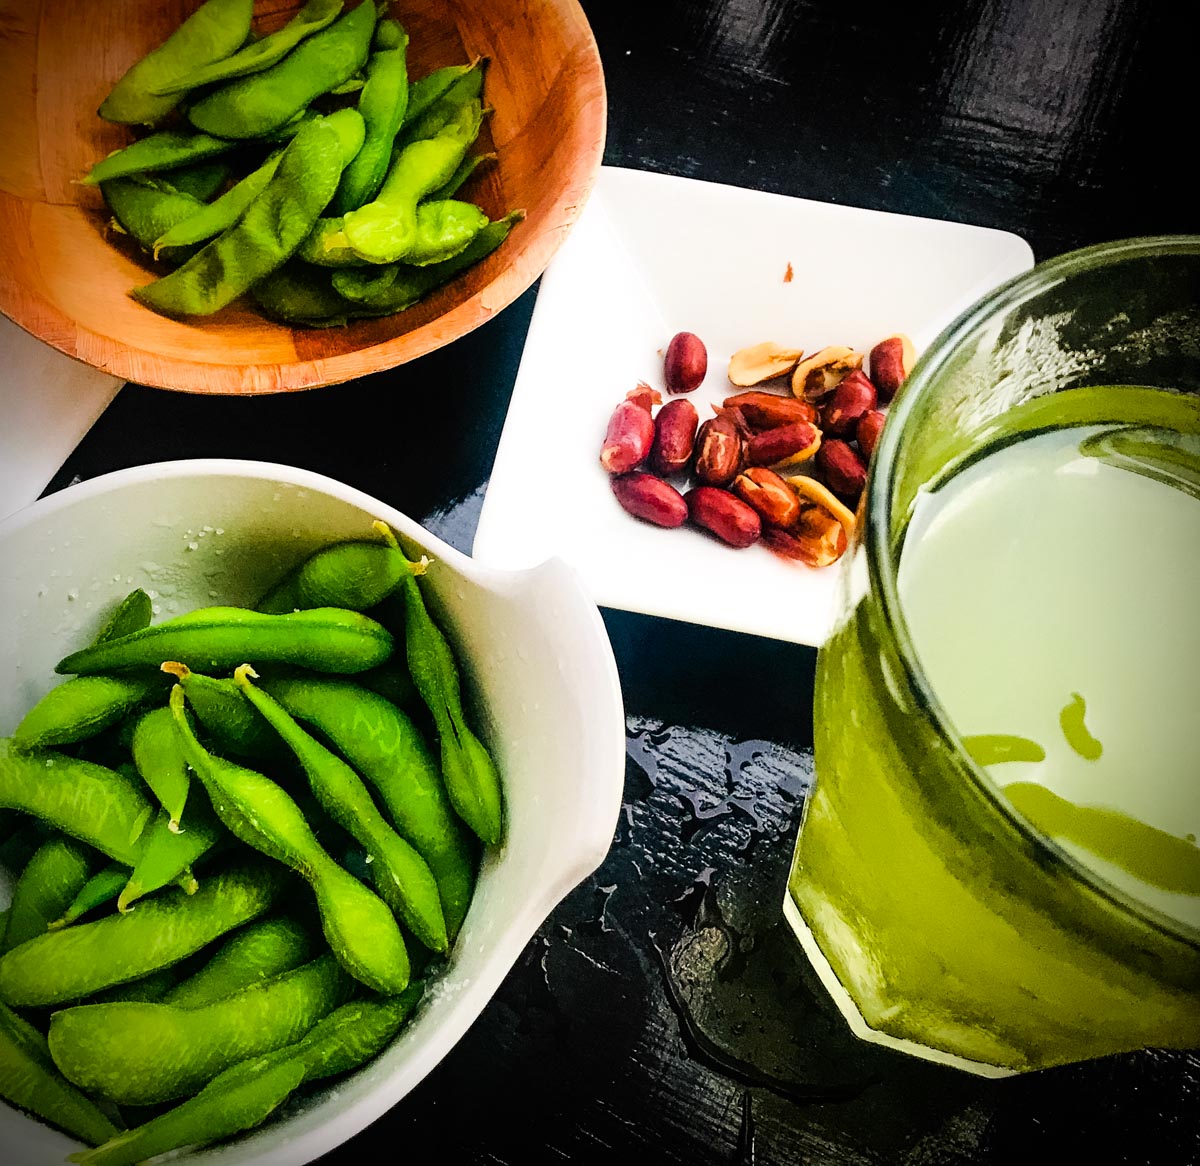 Bright green edamame soy beans in pod served with roasted peanuts and iced green tea